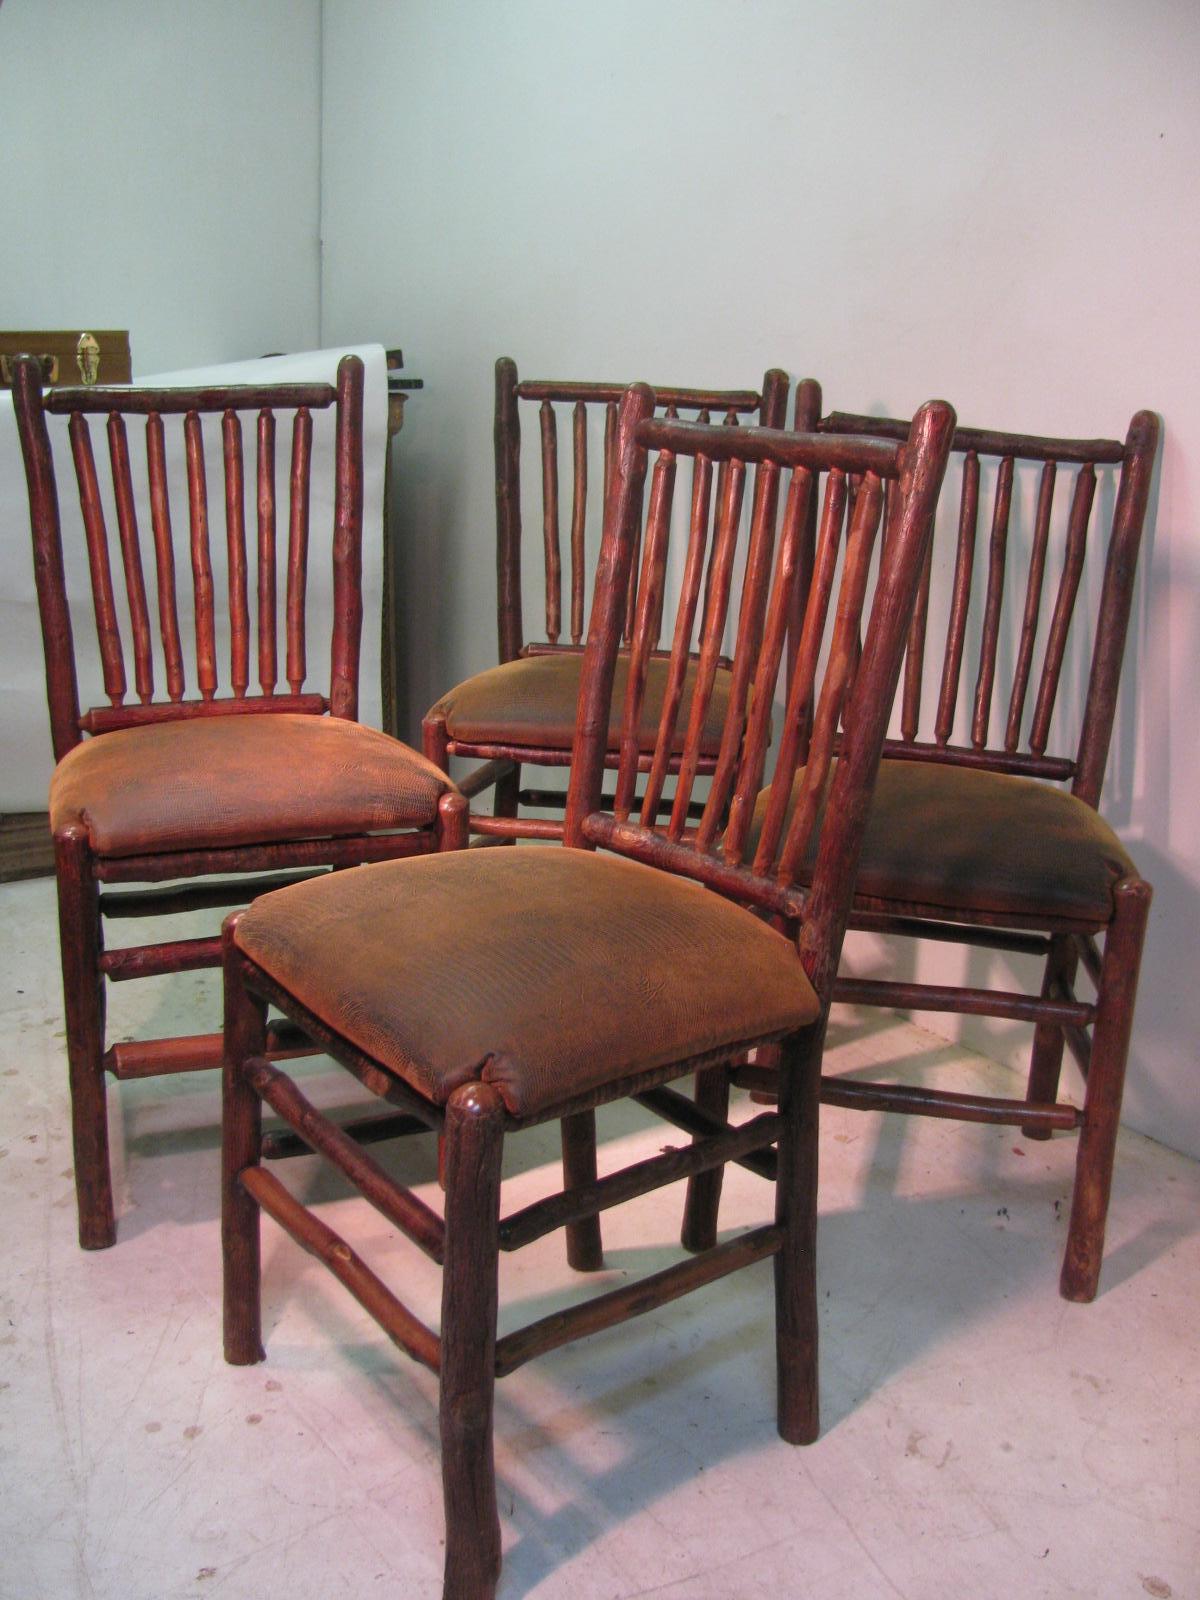 Fabulous set of four Old Hickory side chairs reupholstered in faux alligator leather. Chairs are circa 1935, and in excellent condition with normal wear.